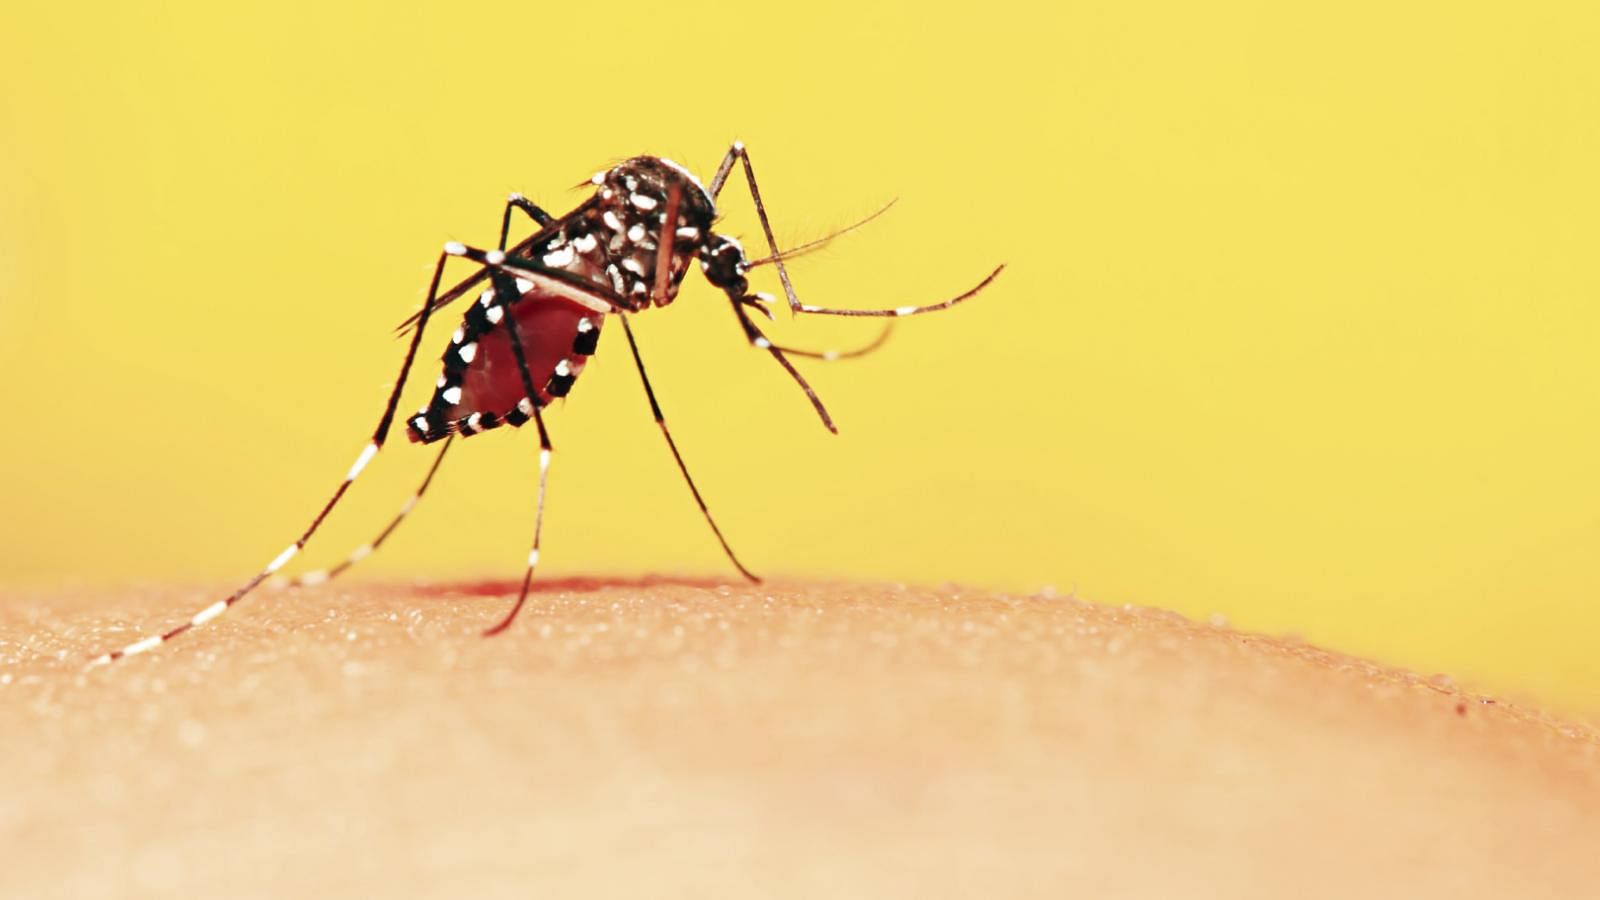 In Africa, malaria kills a child every minute